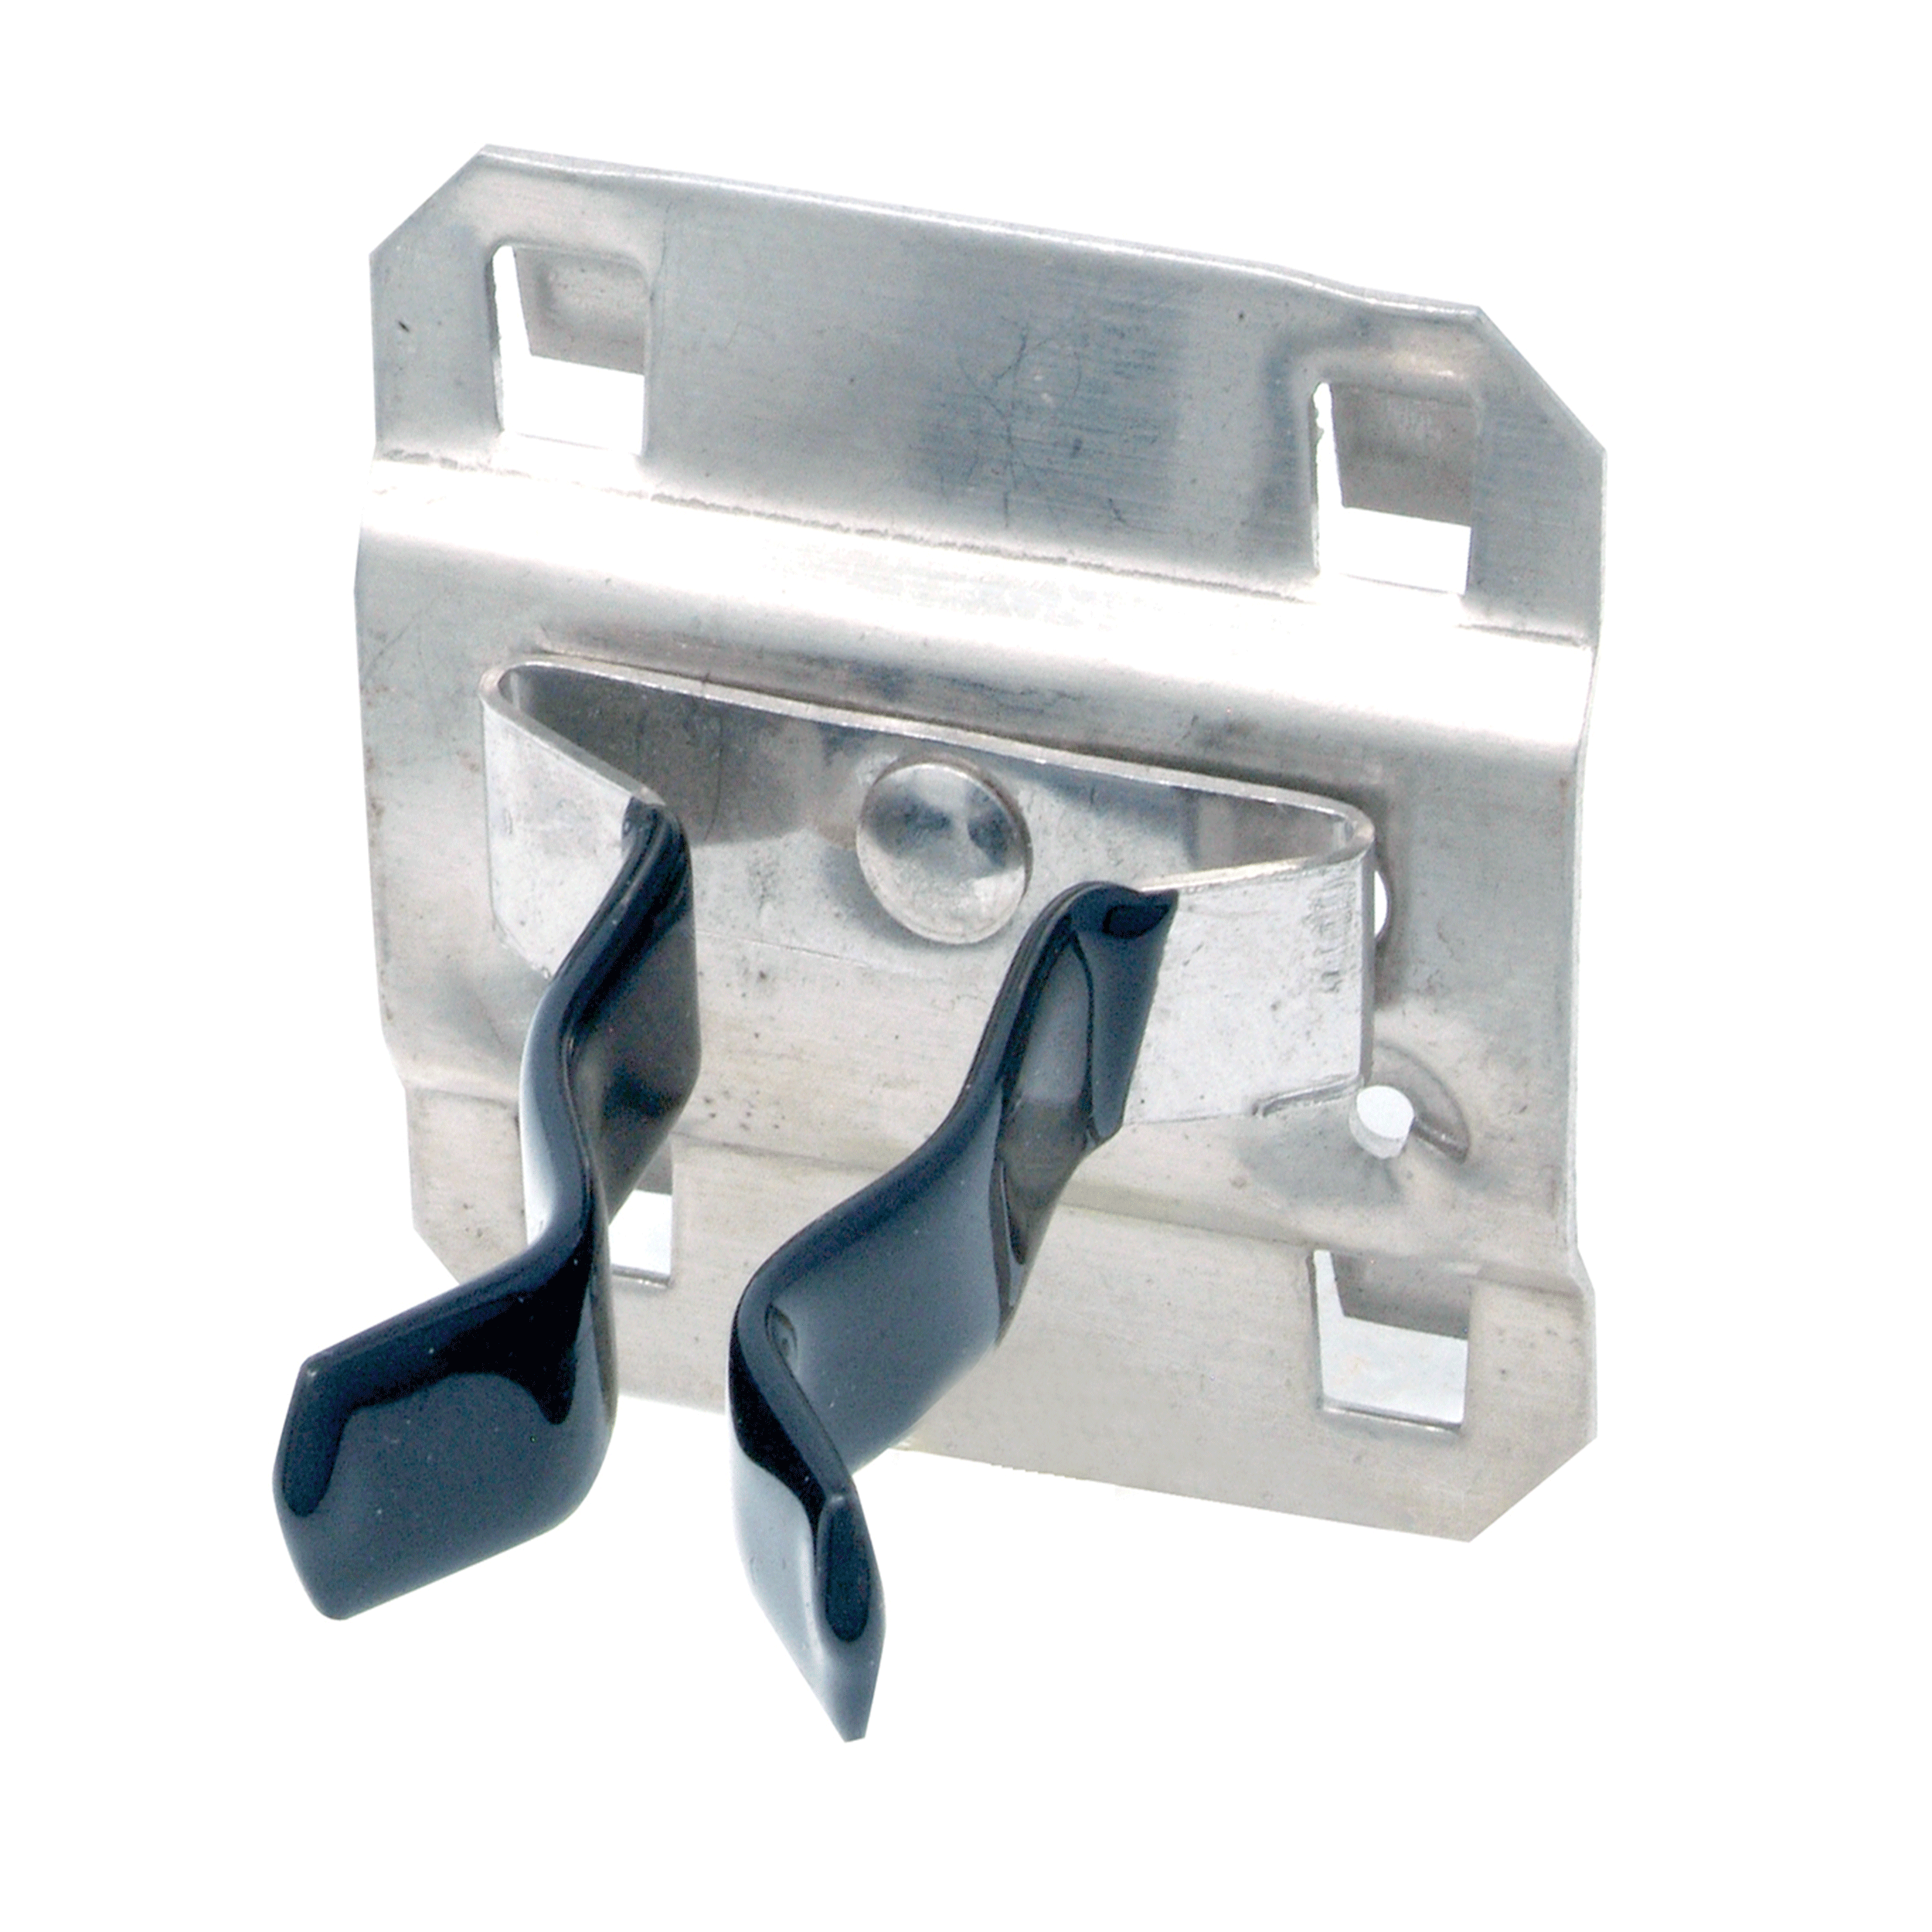 3/4 In. To 1-1/4 In. Hold Range 7/8 In. Proj., Vinyl Dipped Stainless Steel Extended Spring Clip For Ss Locboard, 3 Pack